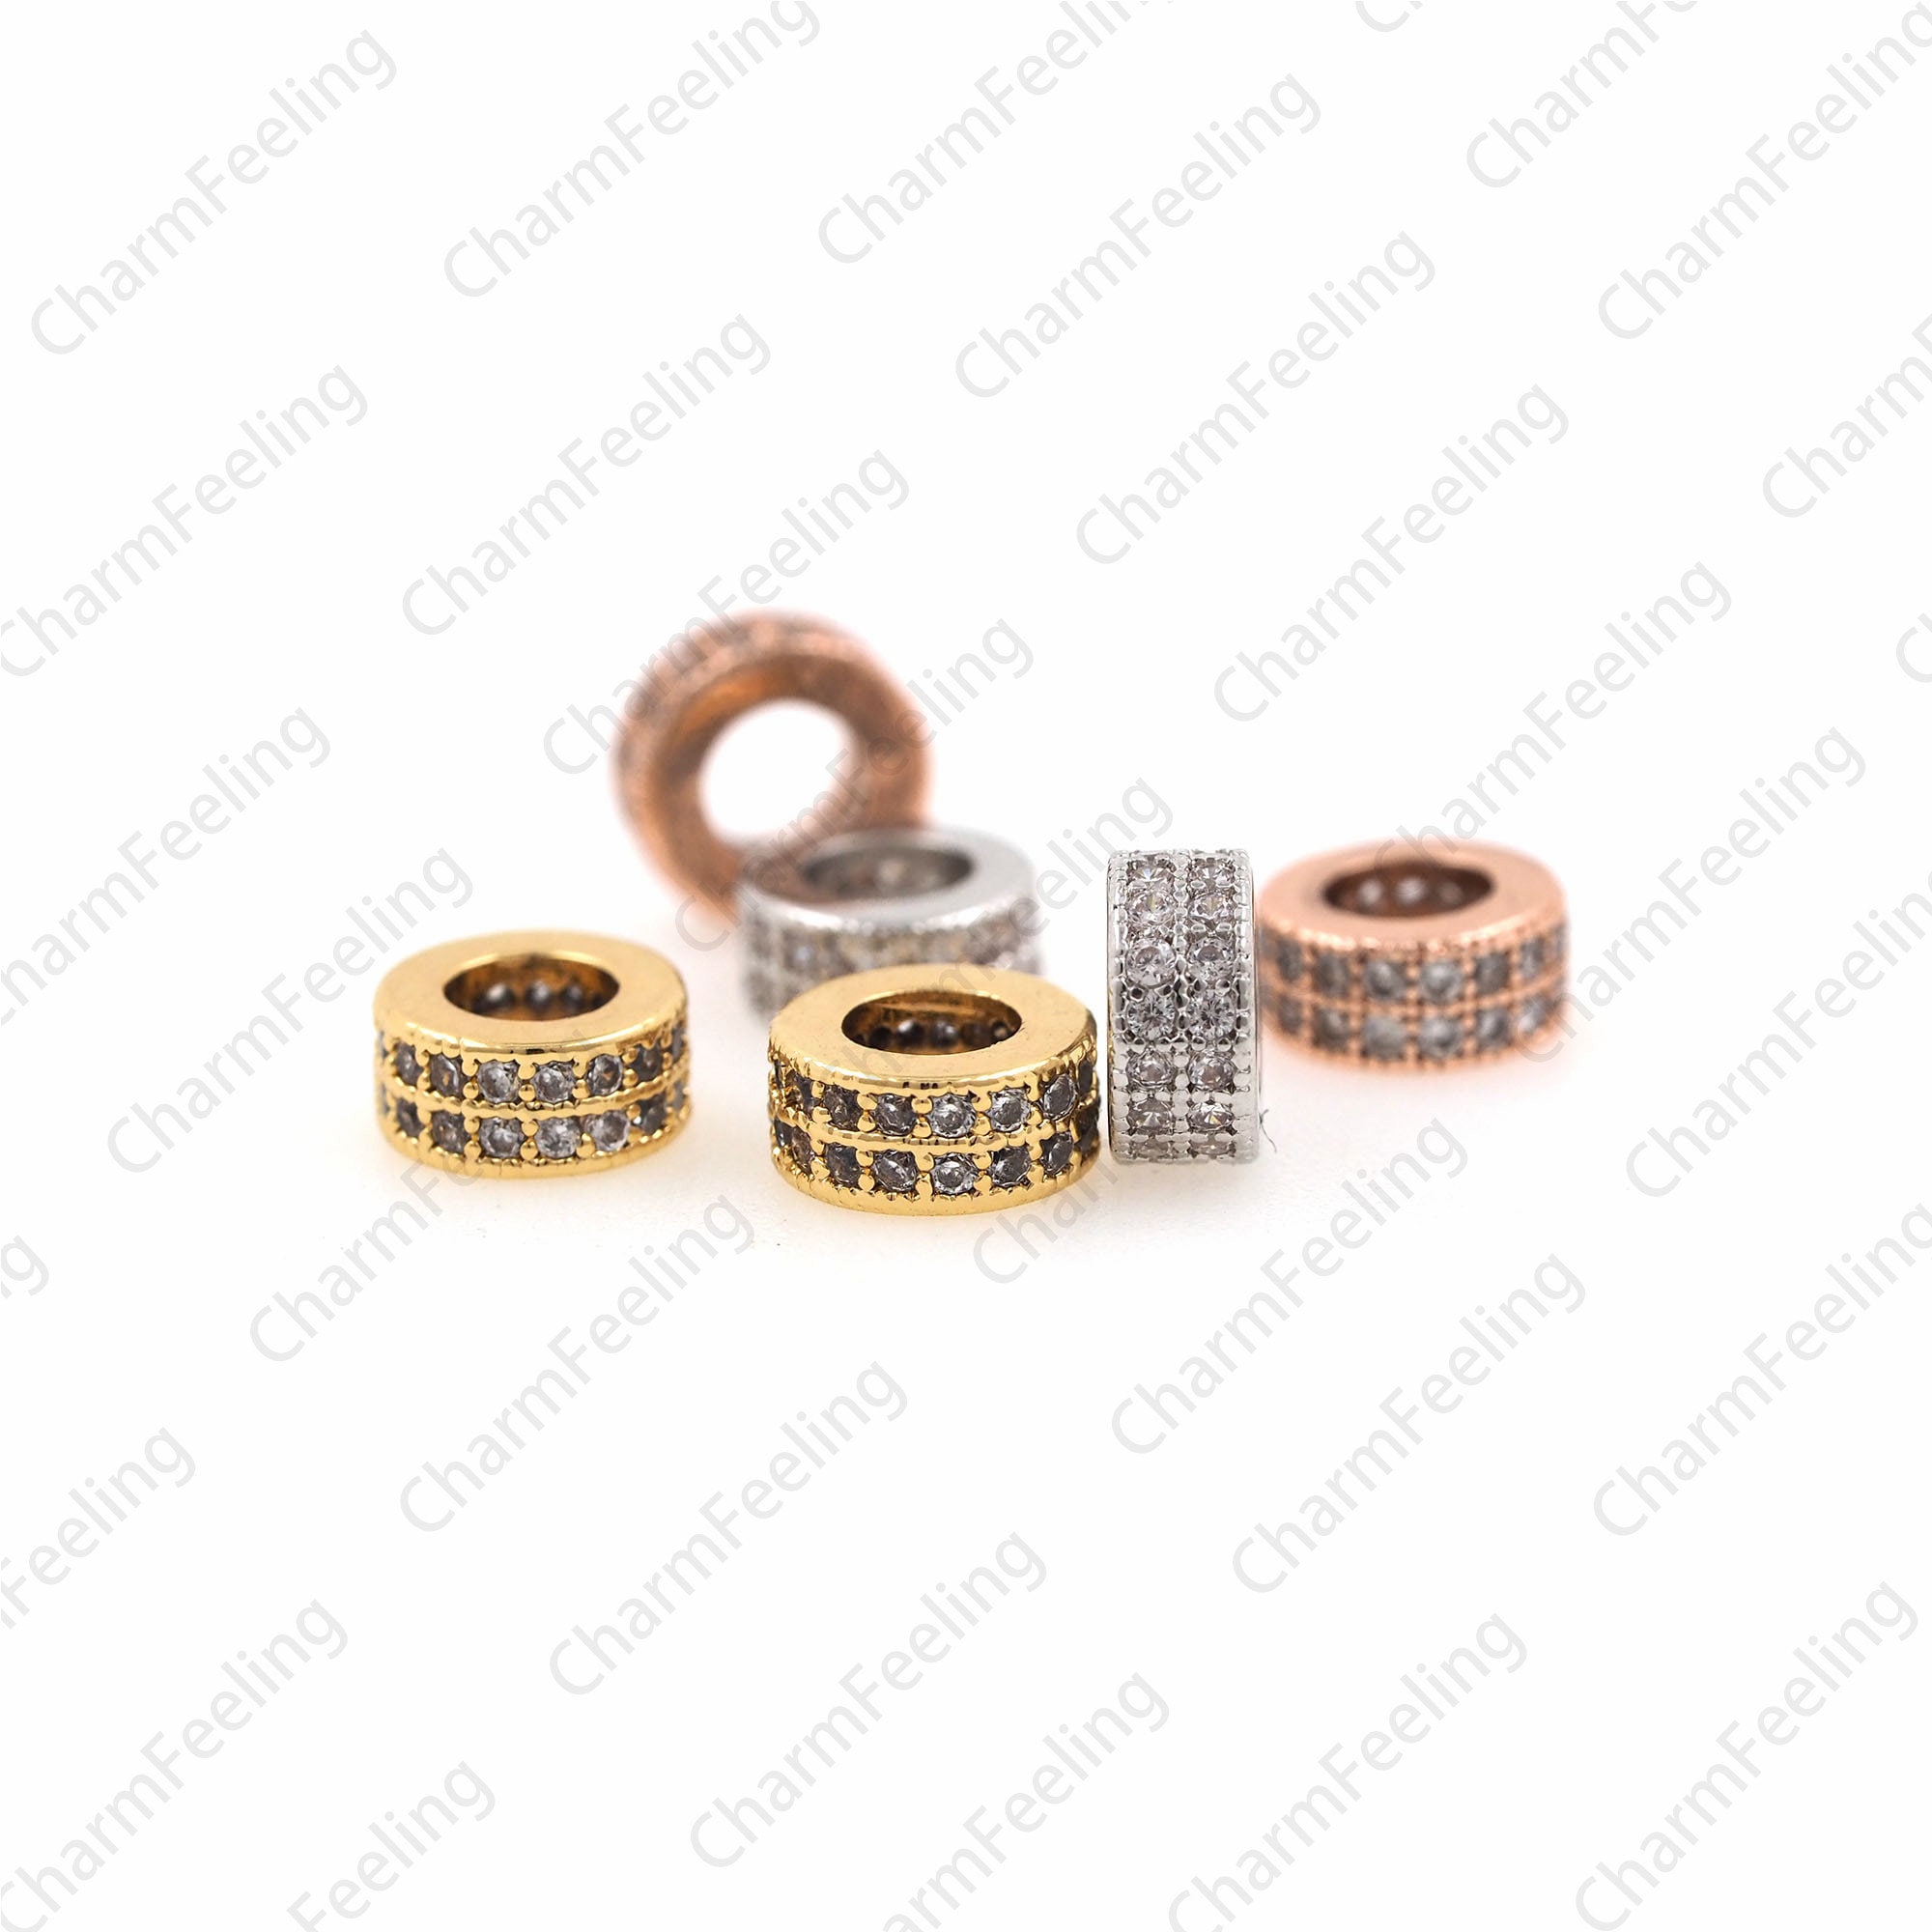 Cz Gasket, Round Flat Large Hole Beads, Bracelet Connector, Necklace Spacer Diy Bead Accessories 8x2.5mm Hole 4mm 1Pcs